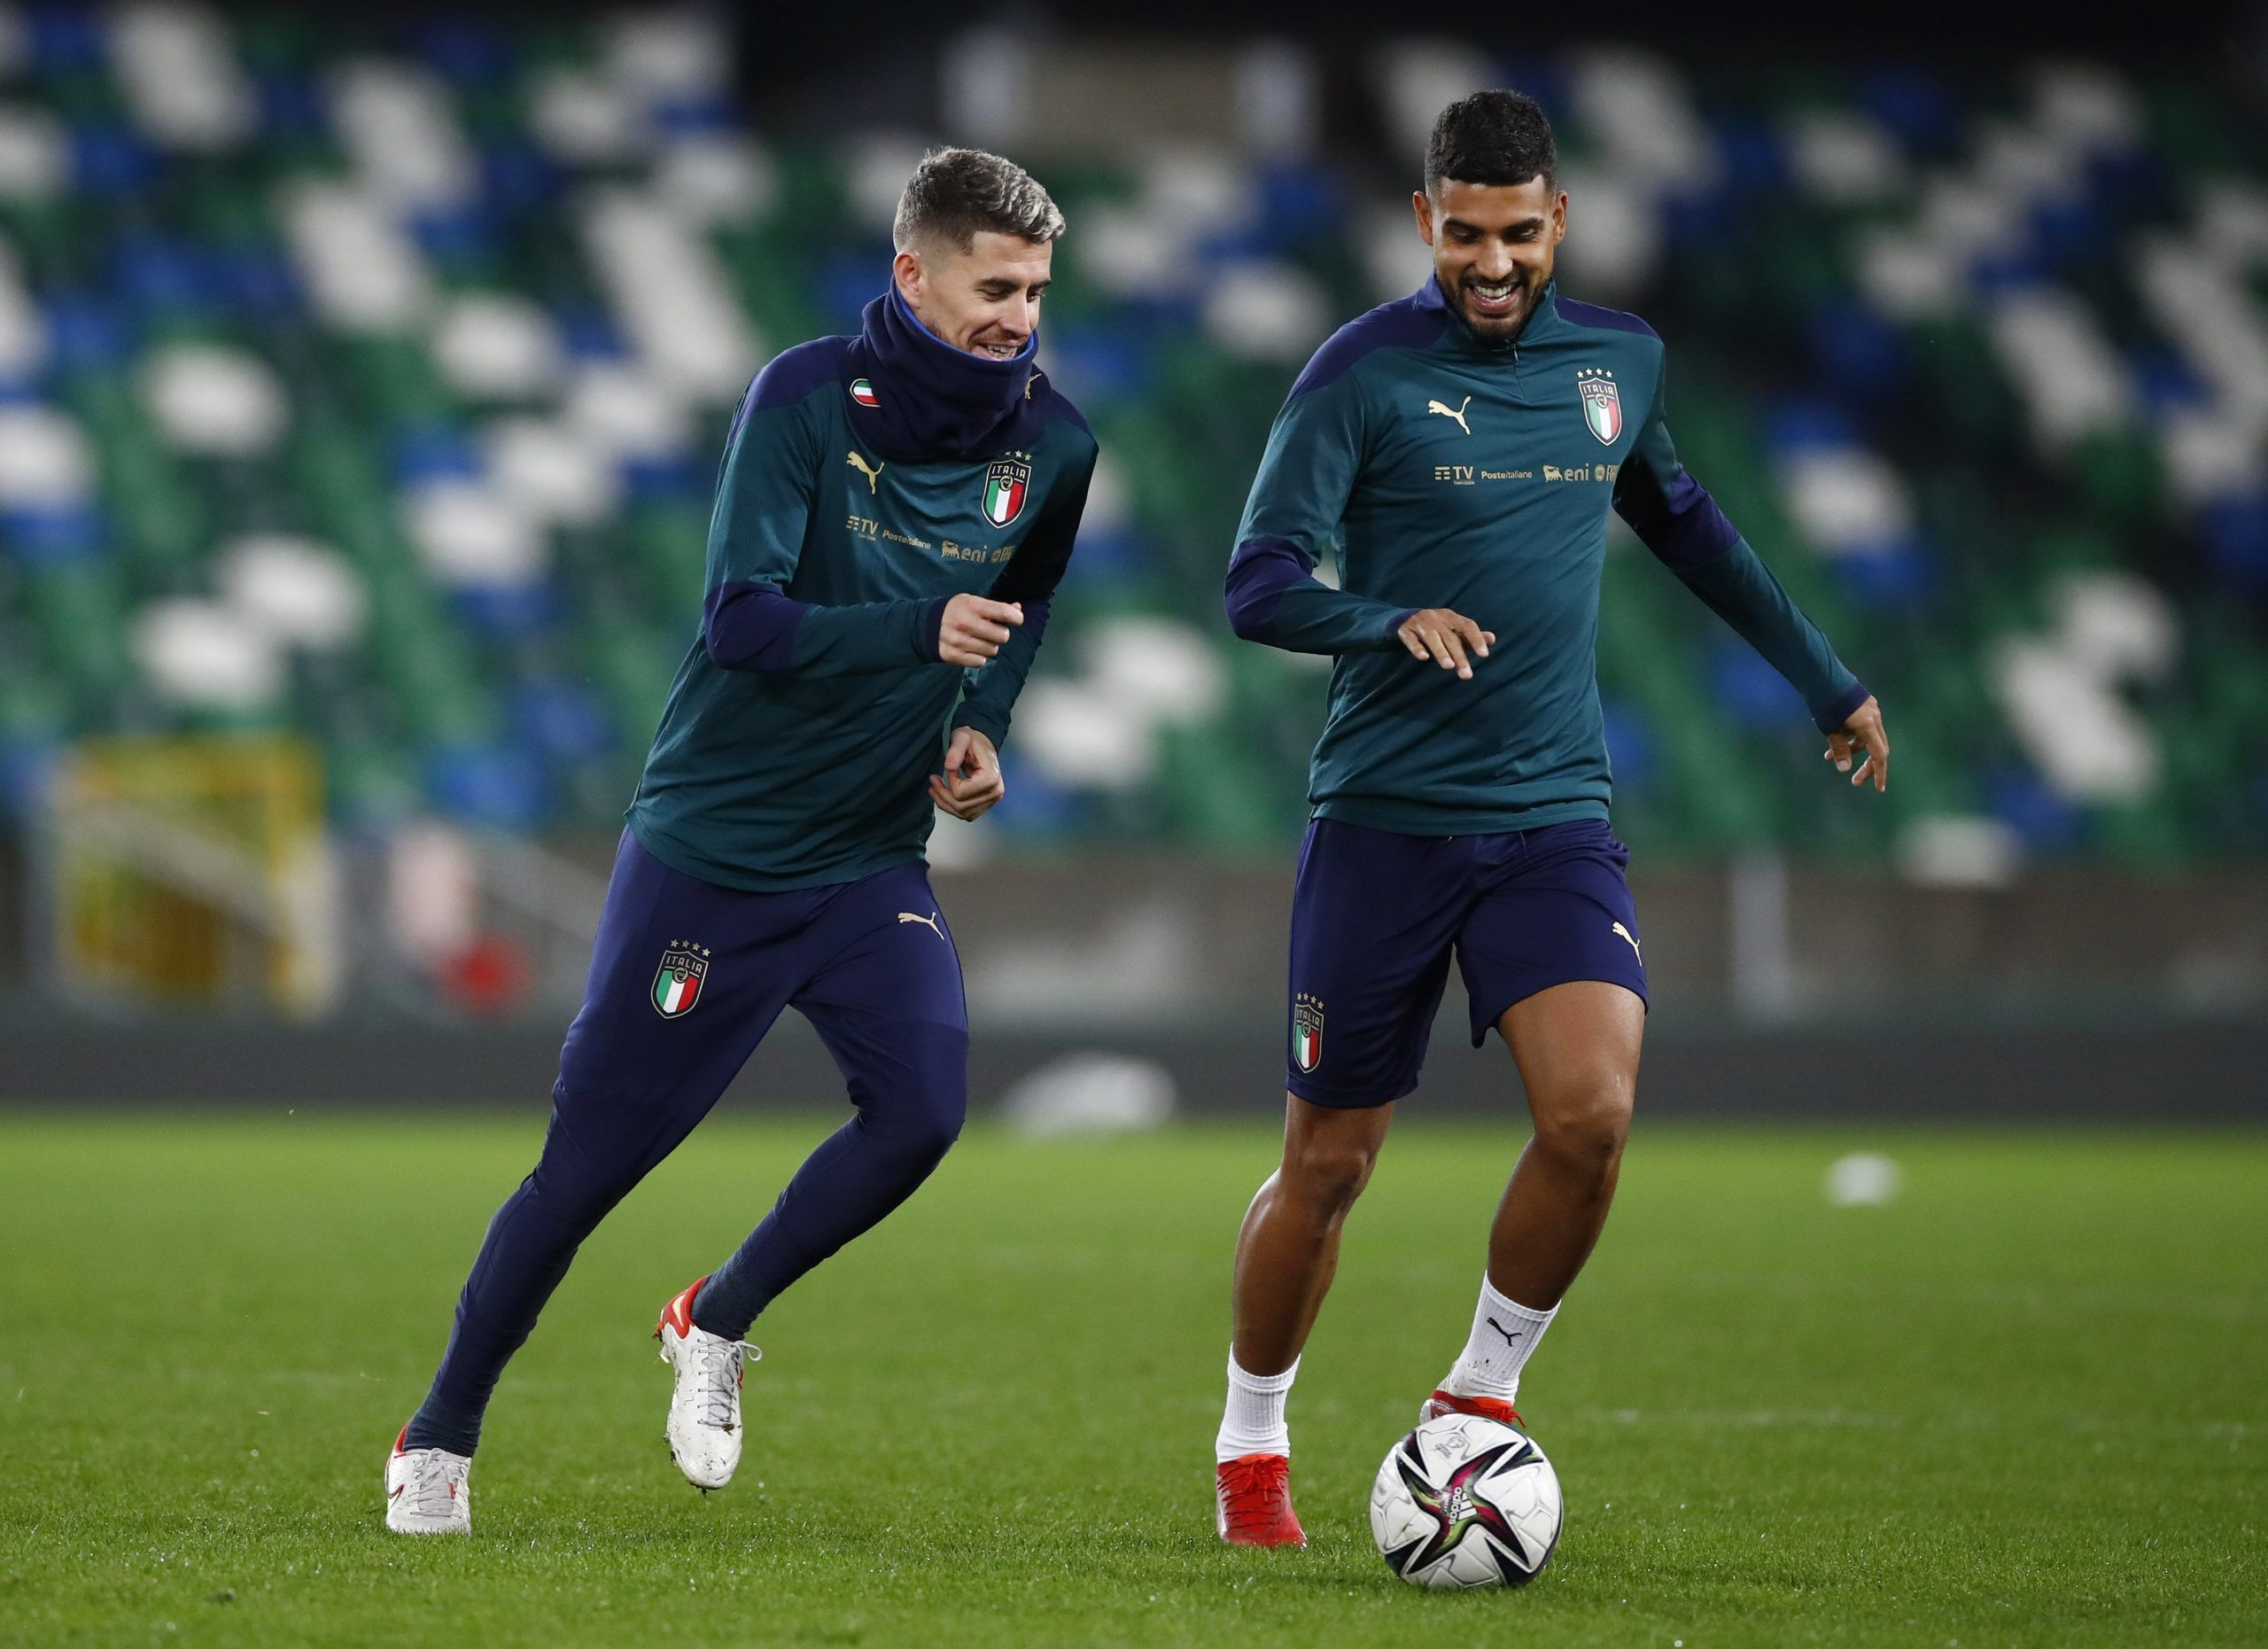 Soccer Football - World Cup - UEFA Qualifiers - Italy Training - Windsor Park, Belfast, Northern Ireland - November 14, 2021 Italy's Jorginho and Emerson Palmieri during training Action Images via Reuters/Jason Cairnduff